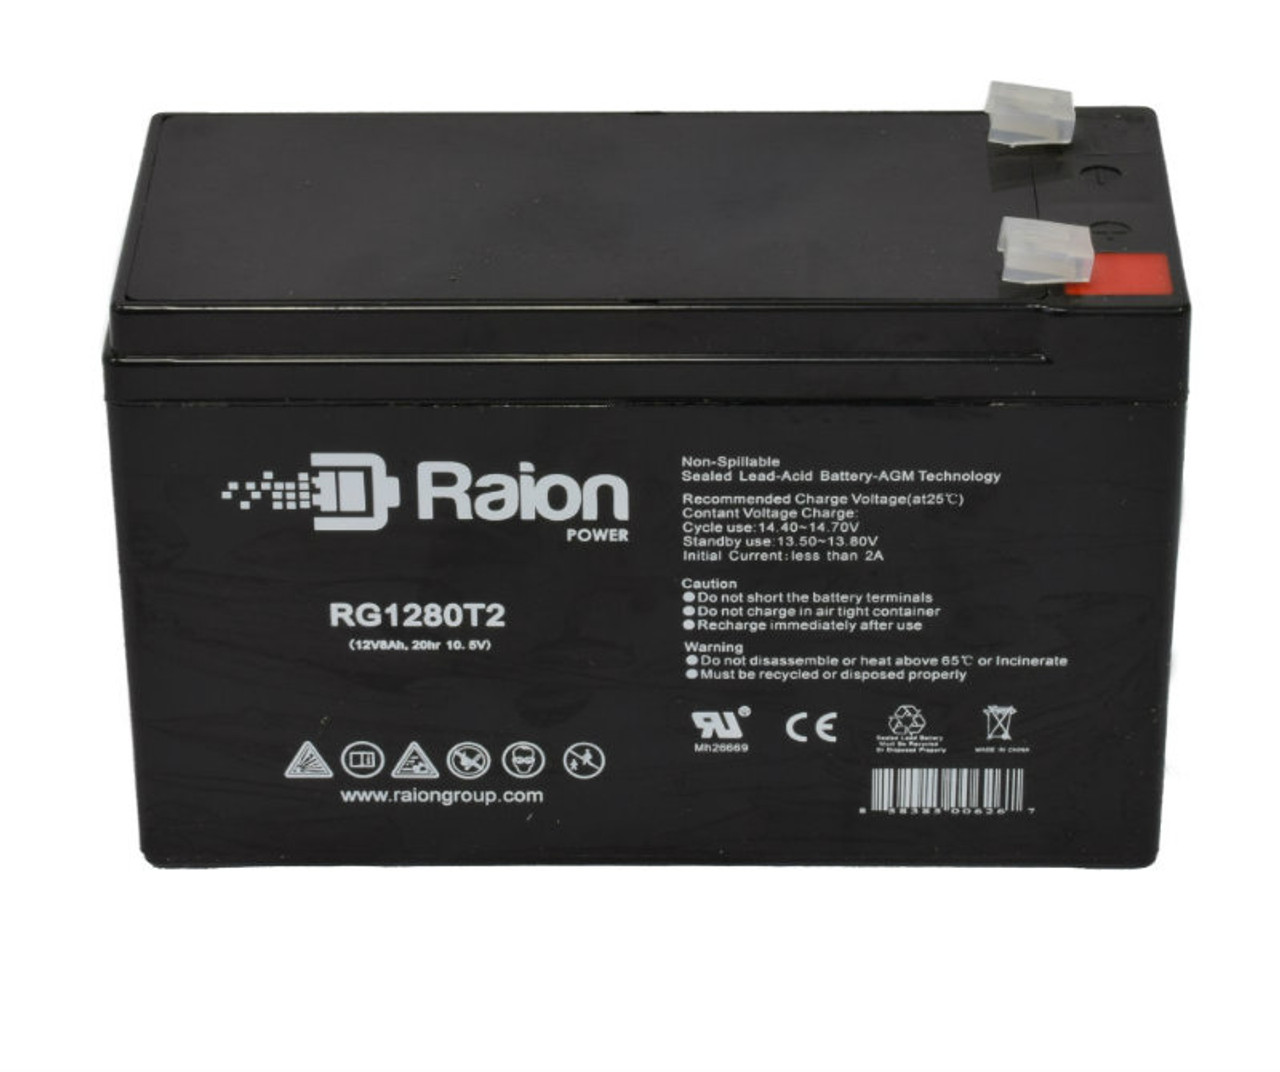 Raion Power Replacement 12V 8Ah Battery for Texas Hunter 70 Lb. Fish Feeder - 1 Pack